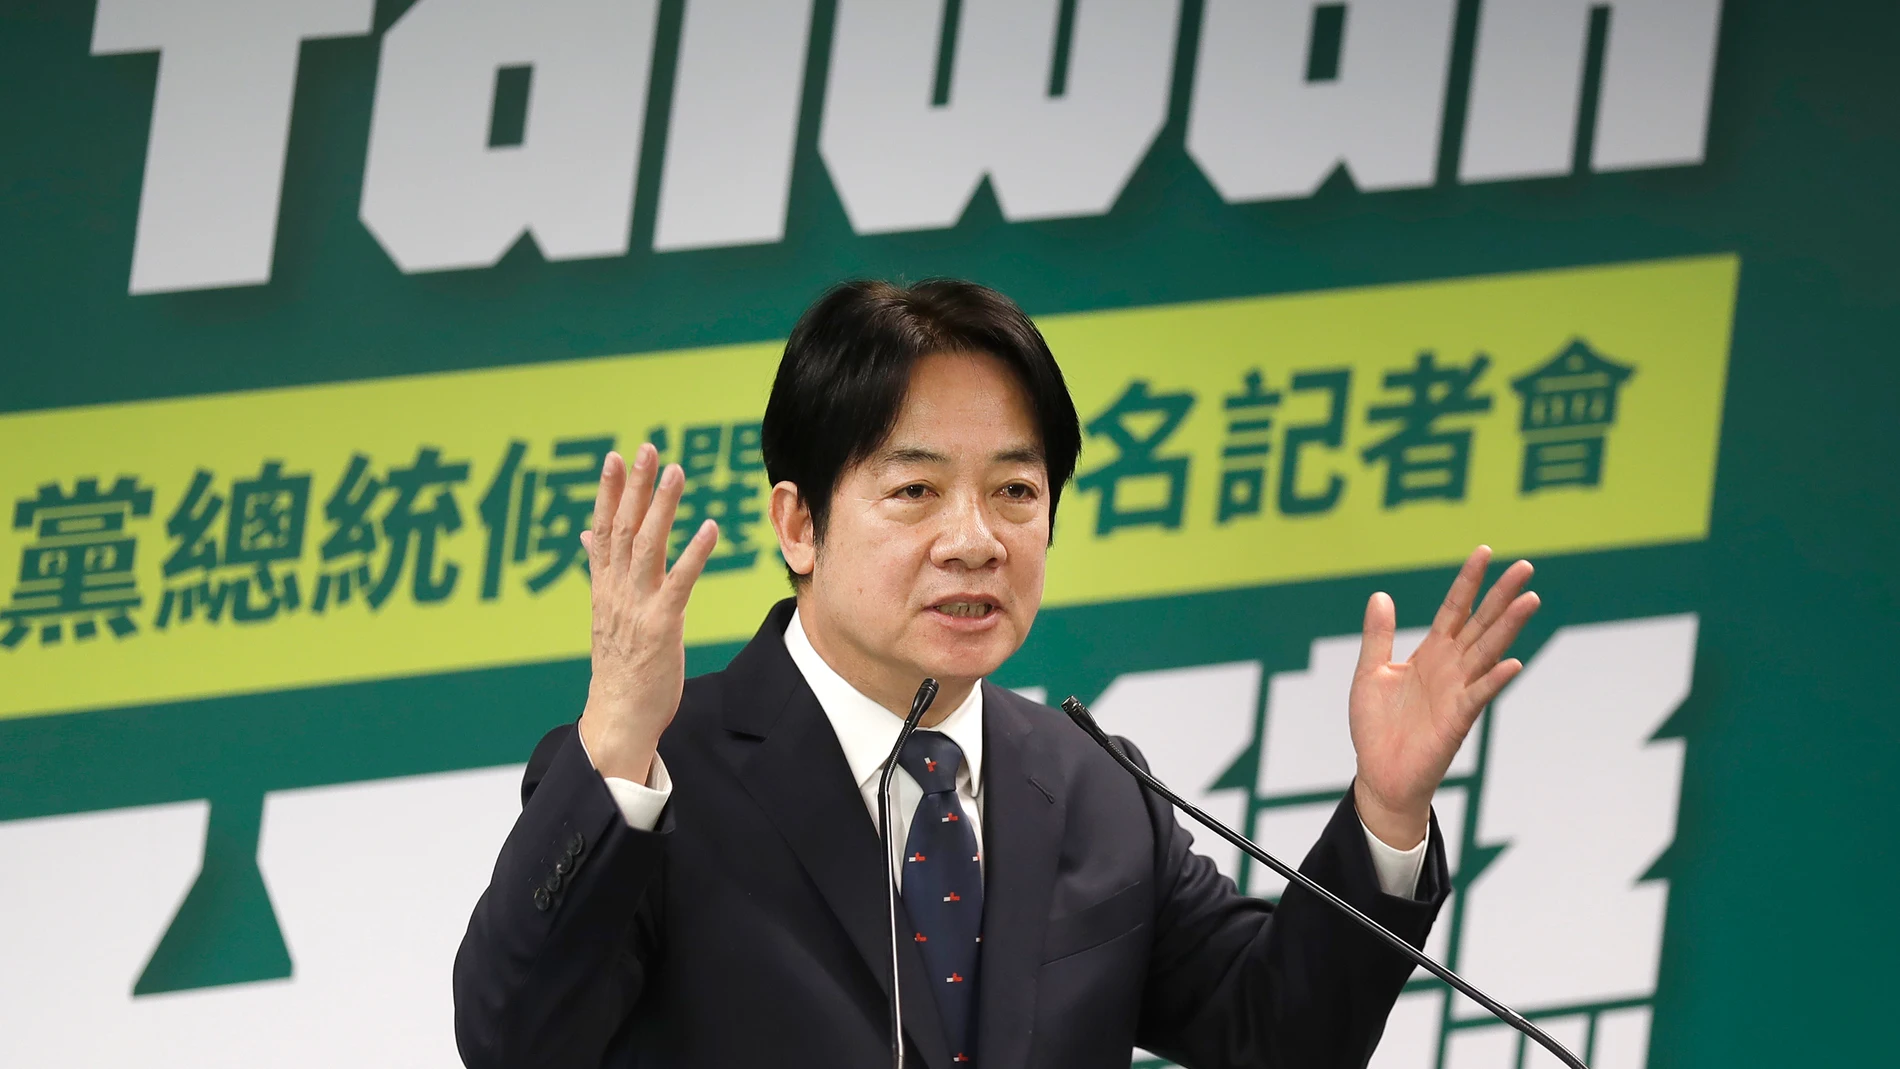 FILE - Taiwan's Vice President Lai Ching-te, also known as William Lai, speaks in Taipei, Taiwan, April 12, 2023. On Saturday, Jan. 13, 2024, the island of 23 million people will choose a new president to replace Tsai Ing-wen, who has served the limit of two terms. The election has drawn high attention because Beijing is opposed to front-runner Lai Ching-te, the candidate from the governing Democratic Progressive Party, which is known for its pro-independence learnings. This has raised concer...